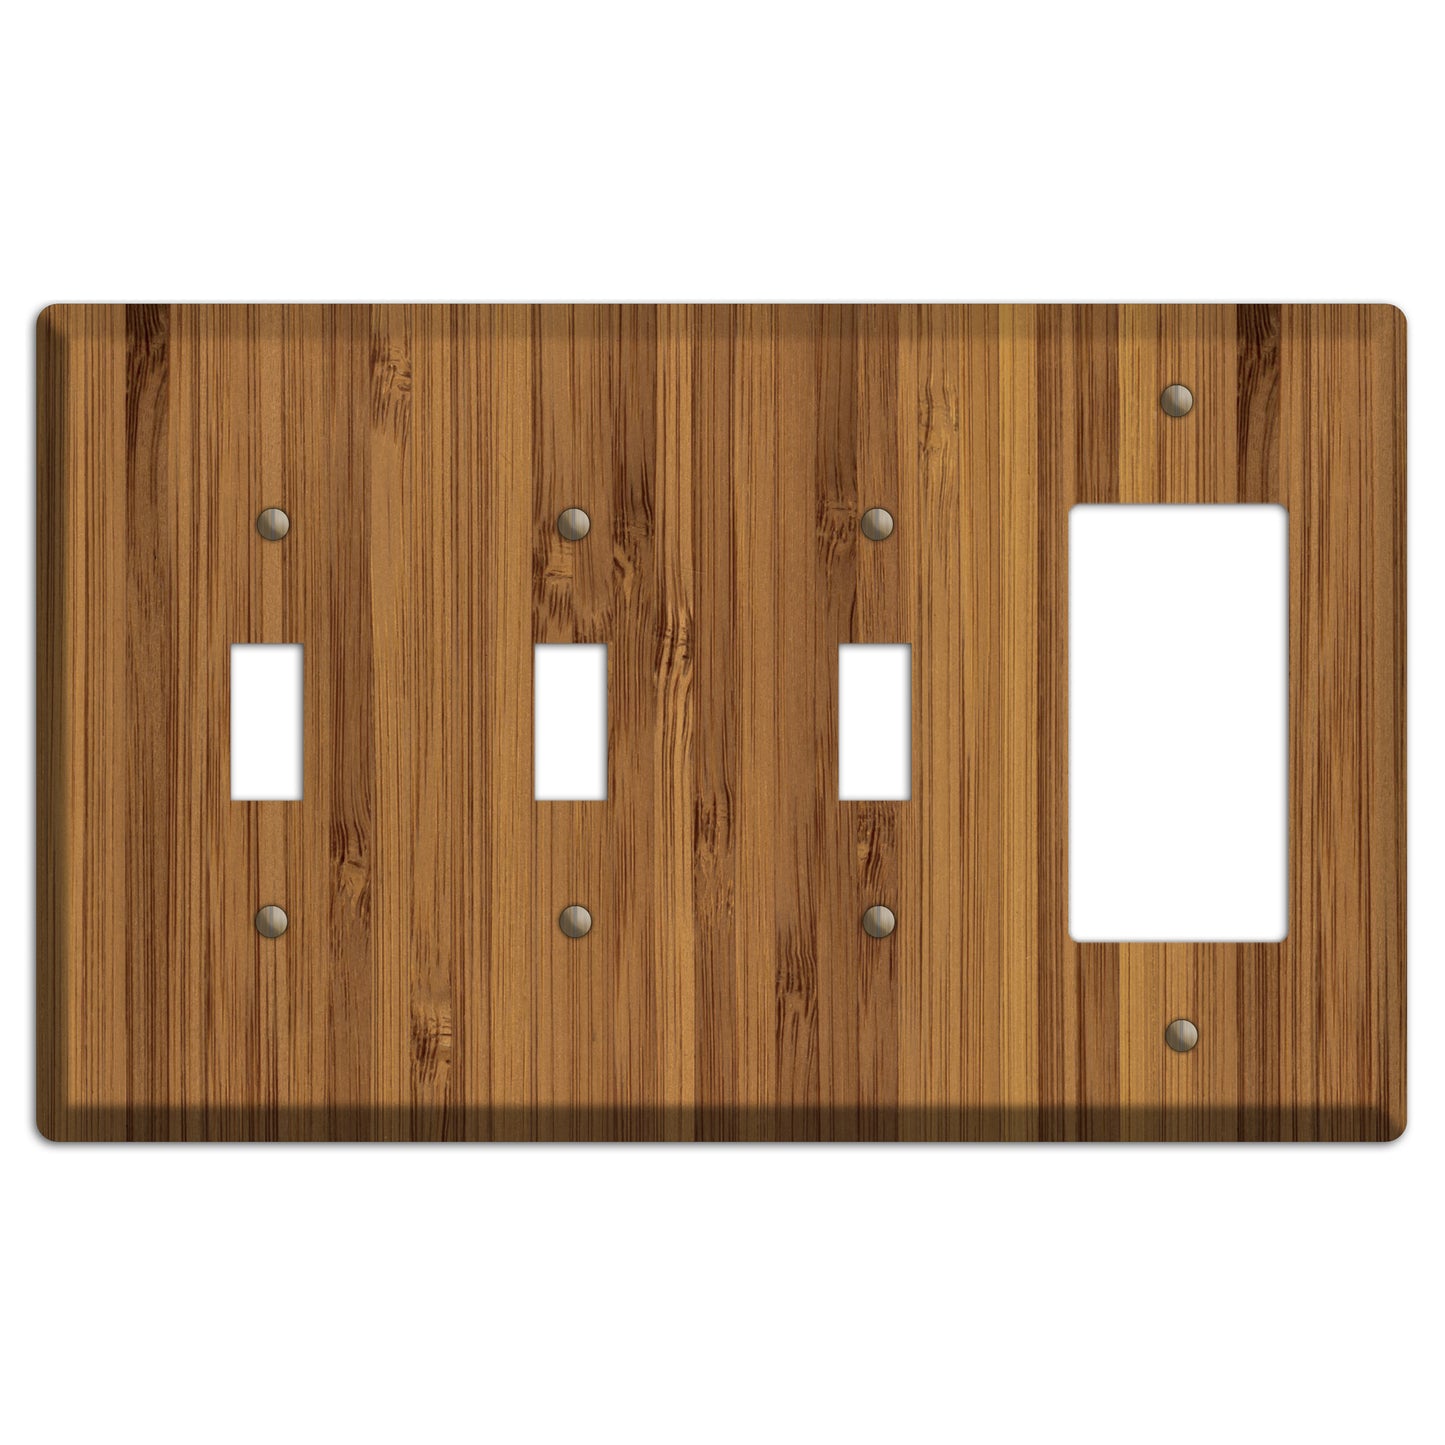 Caramel Bamboo Wood 3 Toggle / Rocker Outlet Cover Plate